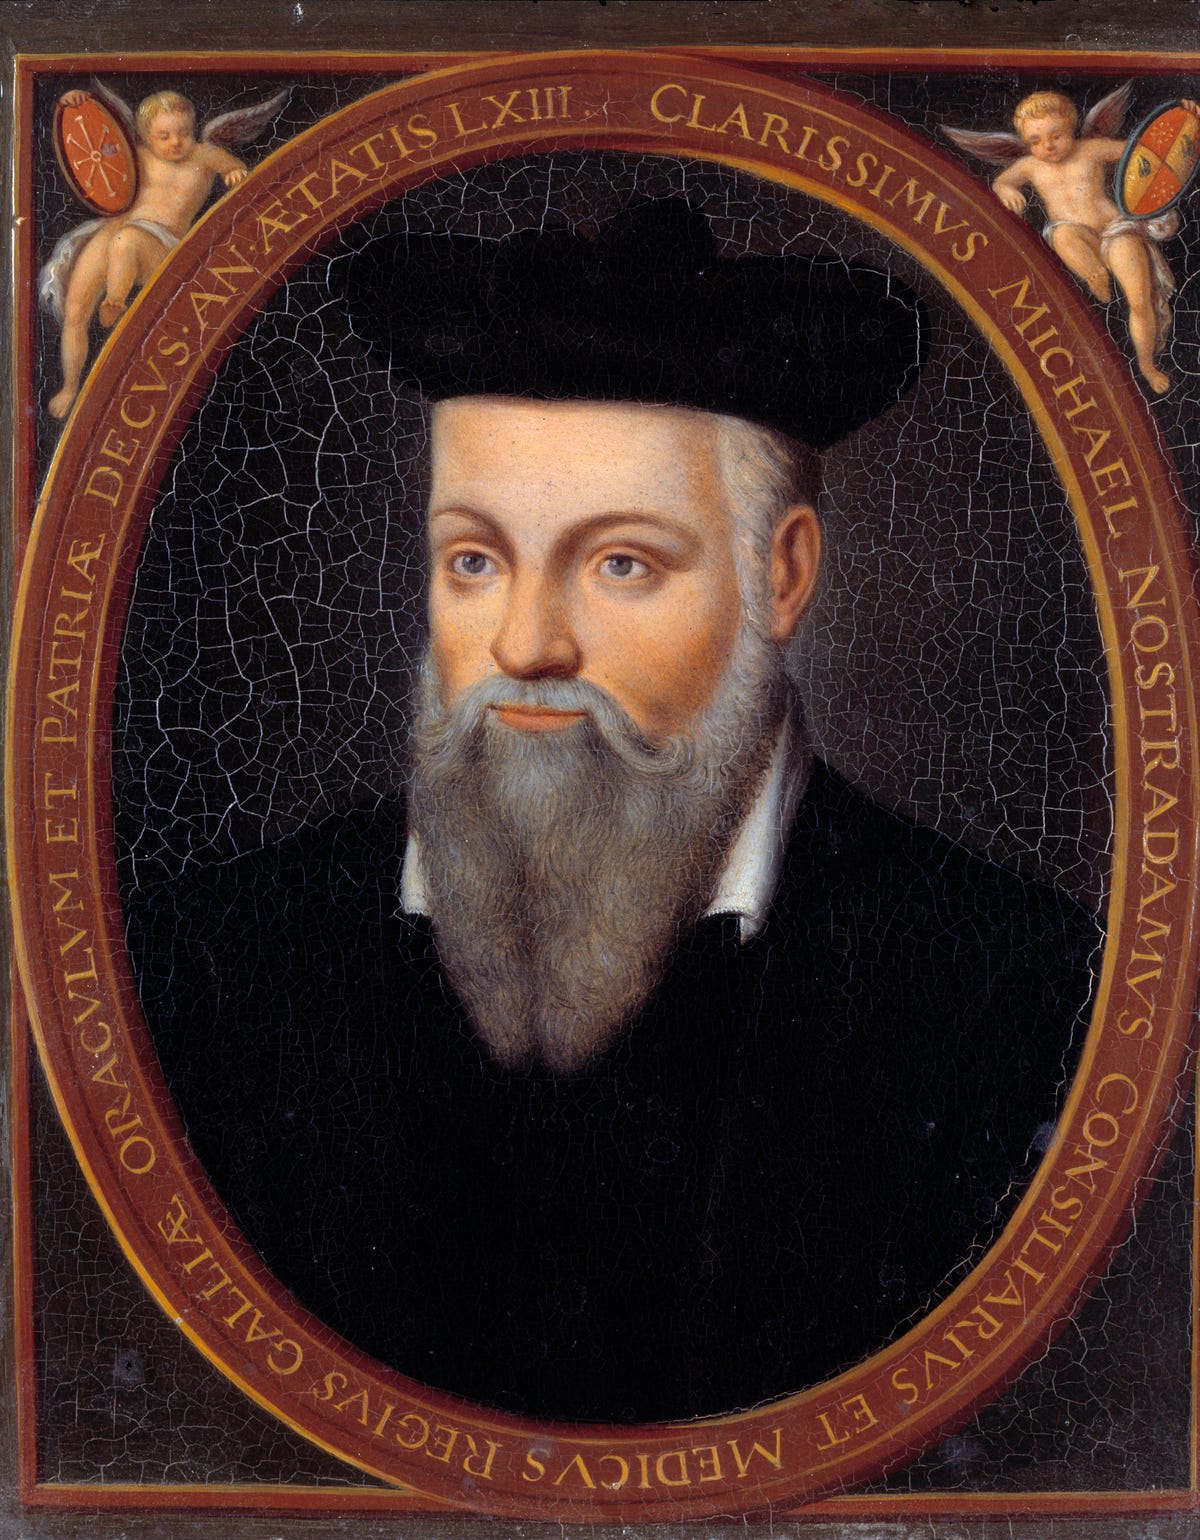 How Nostradamus’ Prophecies Have Affected Our World